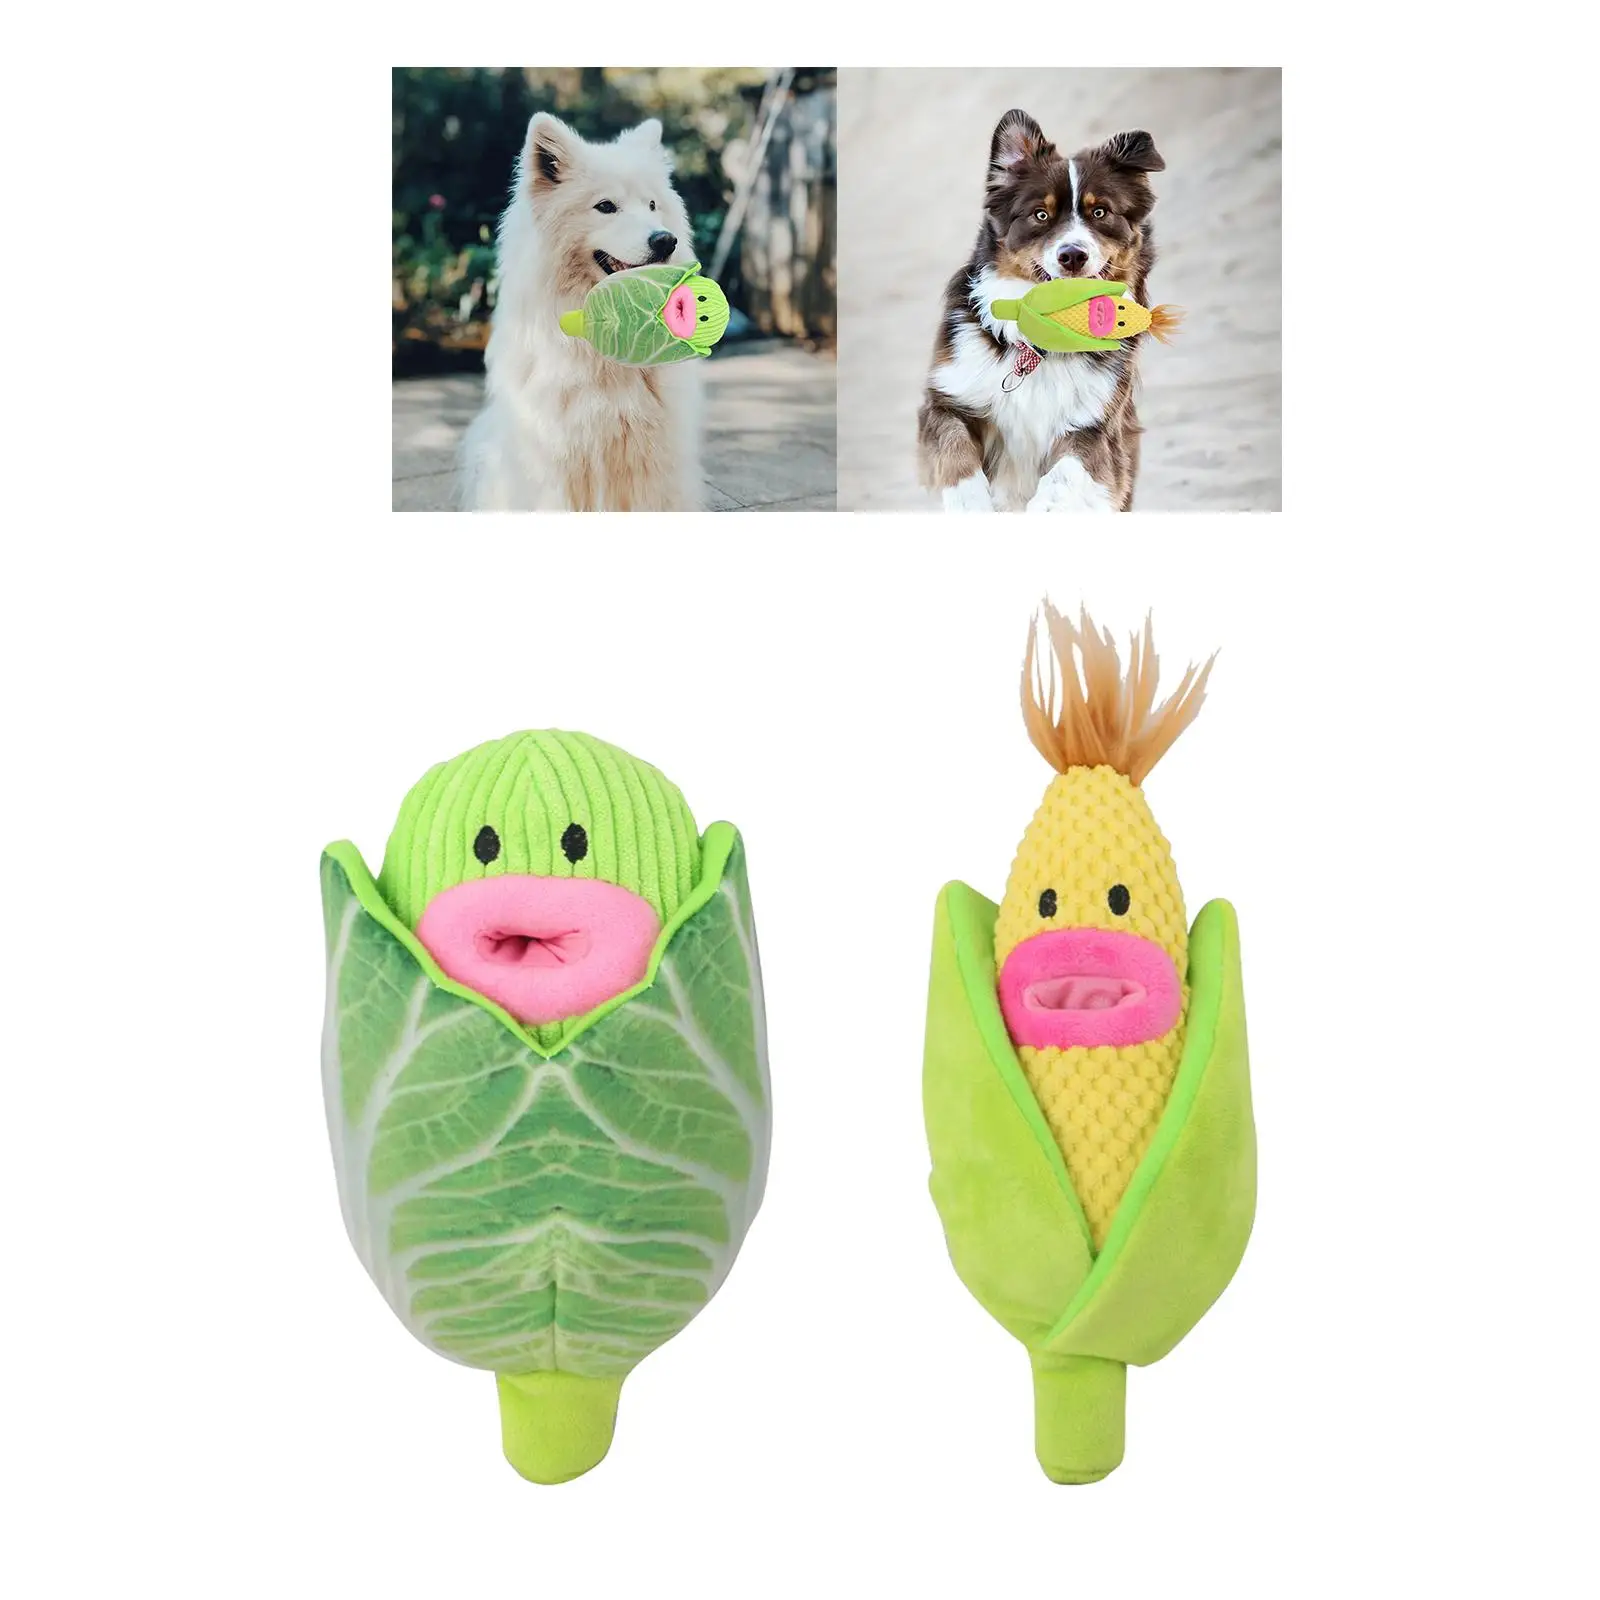 Plush Dog Toy Squeaky Dispensing Pet Supplies Chew Toy for Sniffing Medium Dogs Puppy